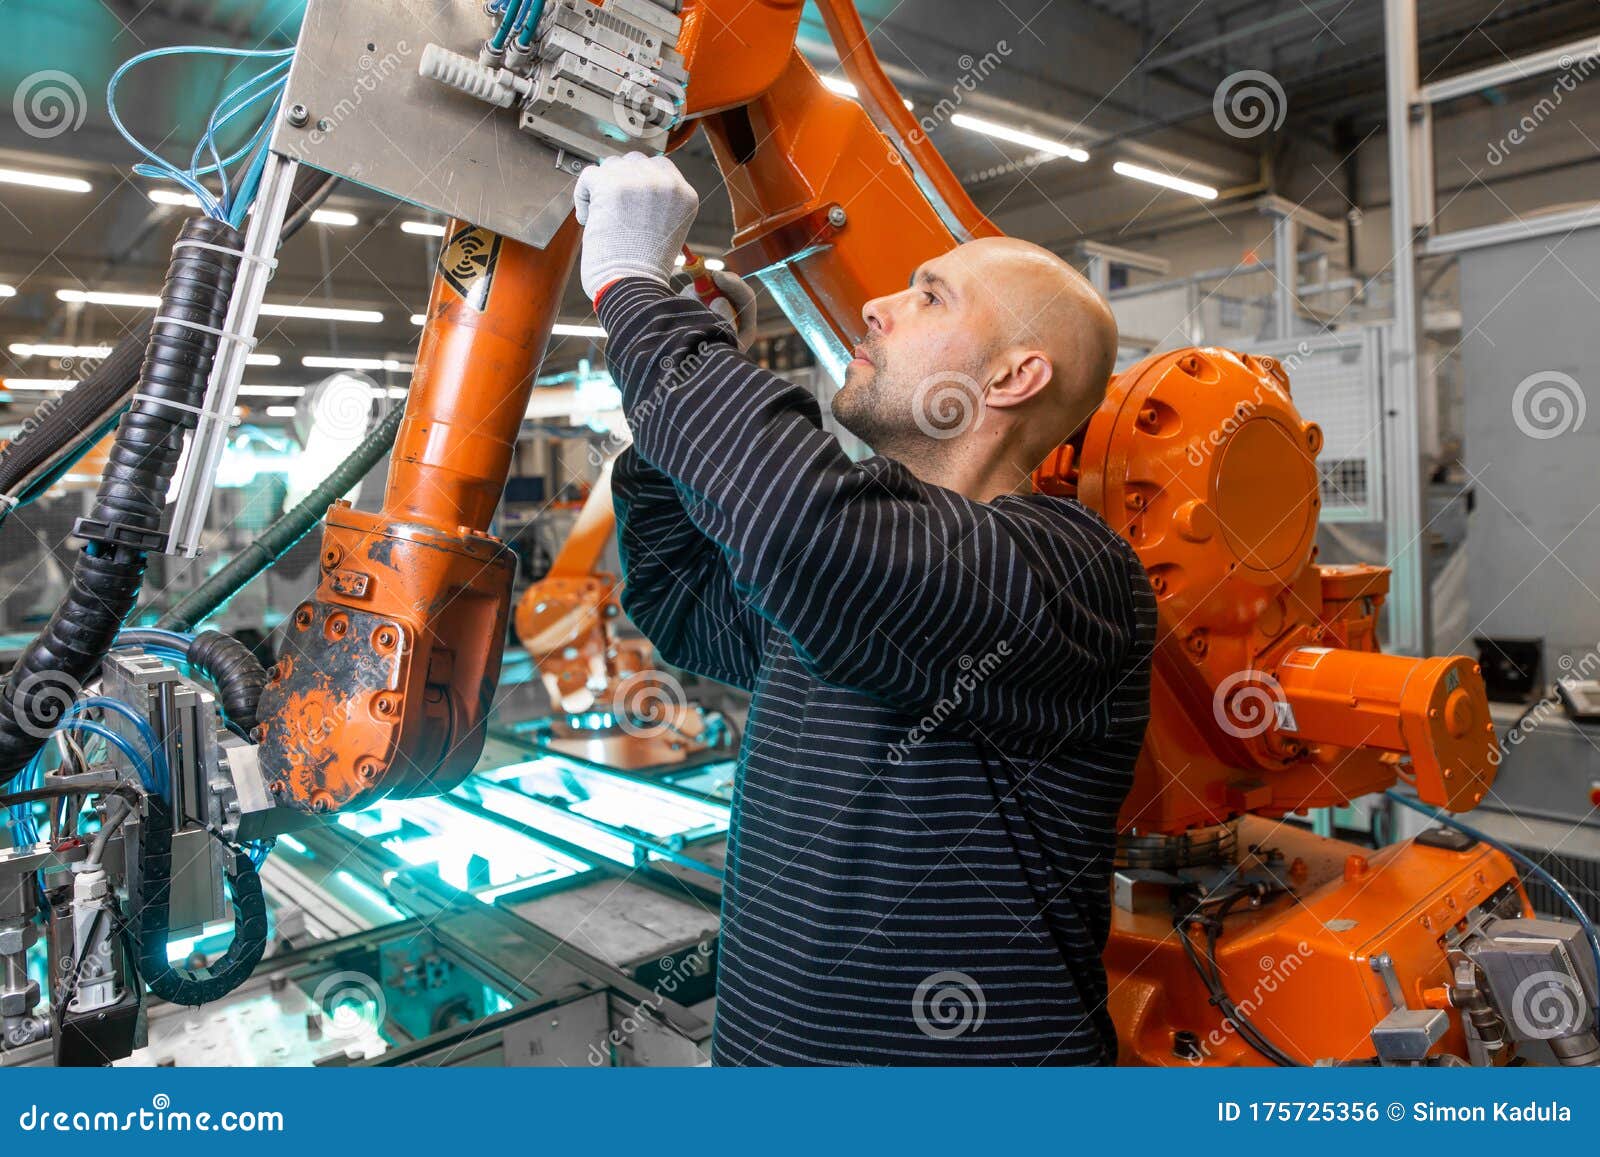 Engineer Doing Maintenance on a Automatic Robot Arms in Automotive